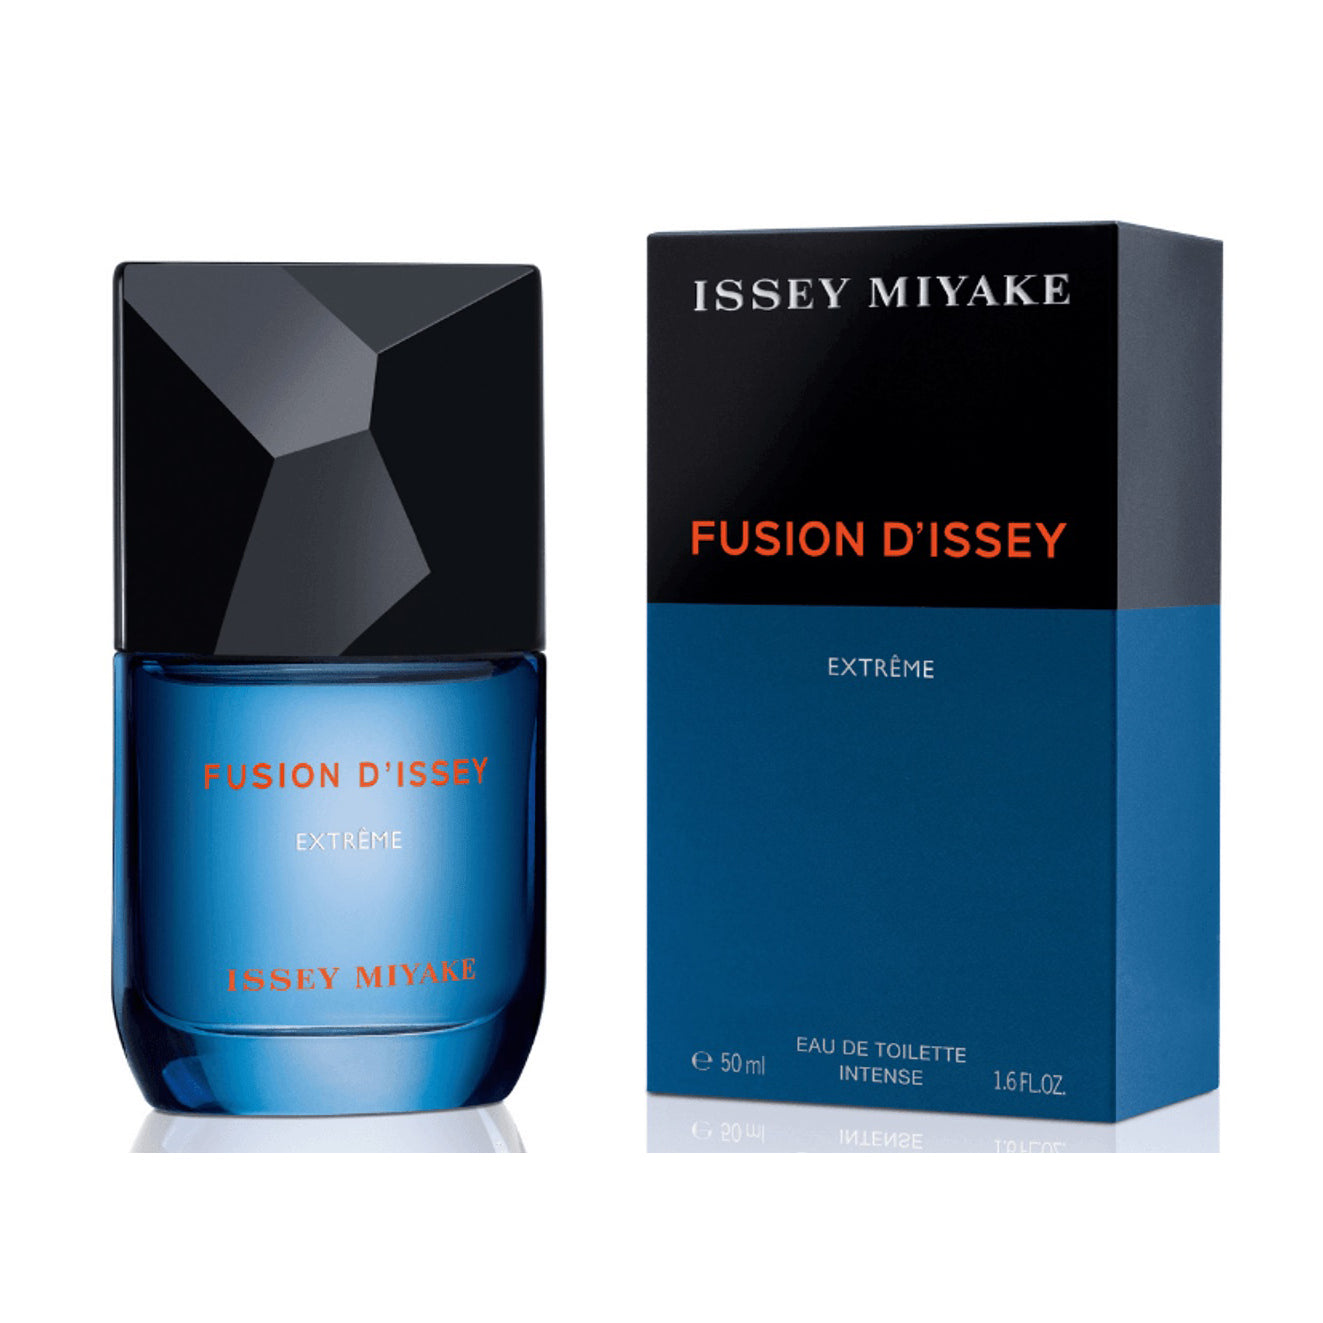 ISSEY MIYAKE FUSION D'ISSEY EXTREME (M) EDT INTENSE 50ML